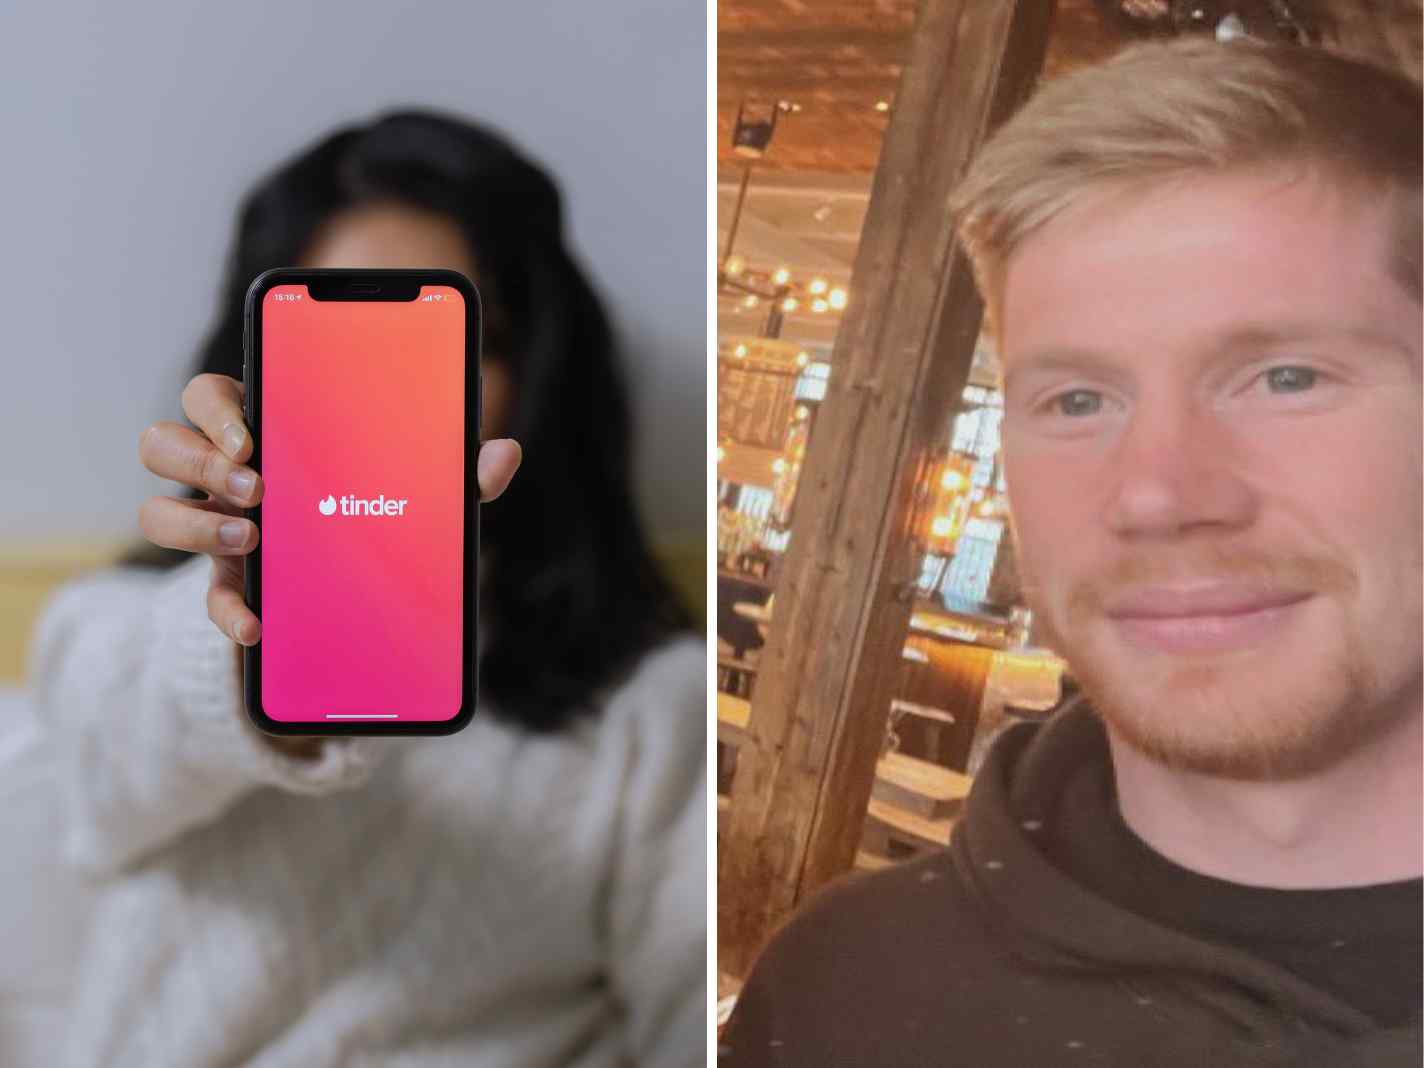 Man City Fan Unmatches After Tinder User Fails To Recognize Kevin De Bruyne And Kyle Walker